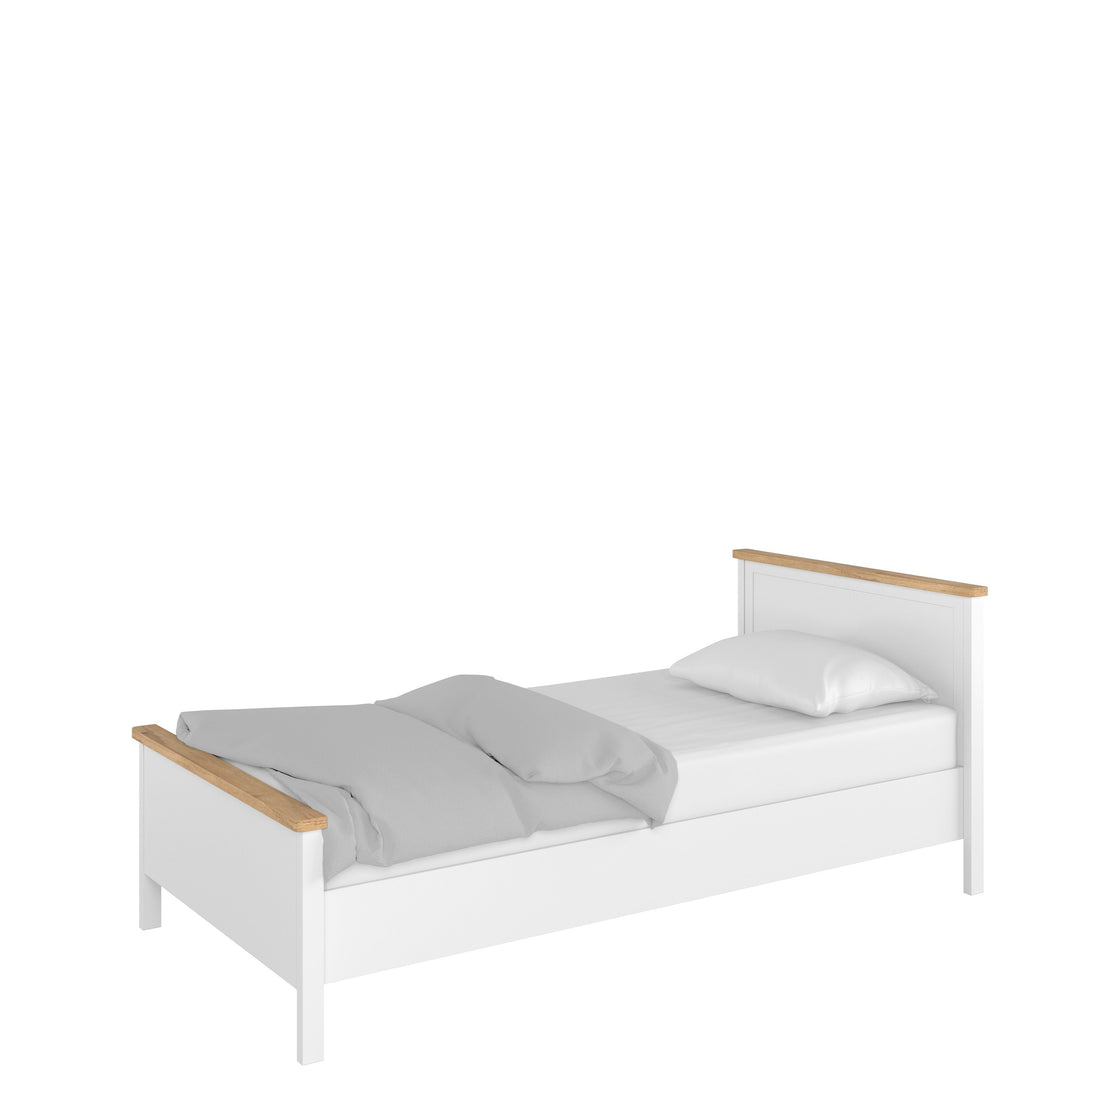 Story SO-08 Bed with Mattress - £302.4 - Kids Single Bed 